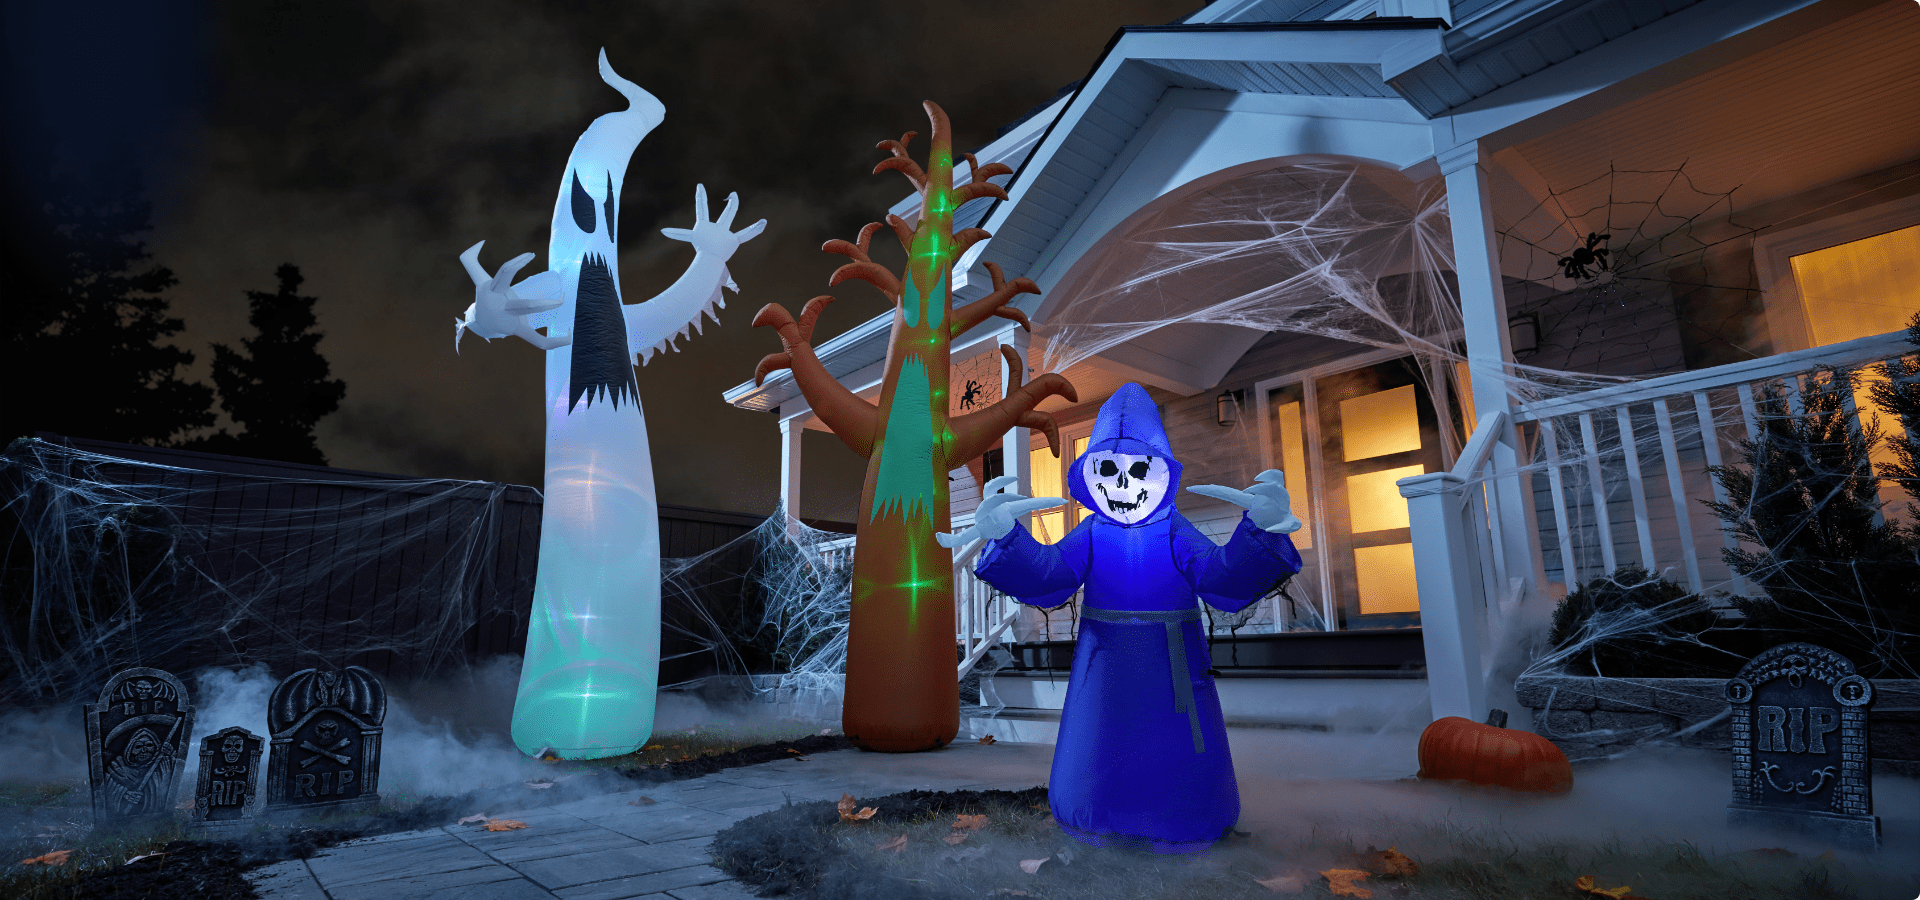 Spooky Halloween inflatables on lawn.